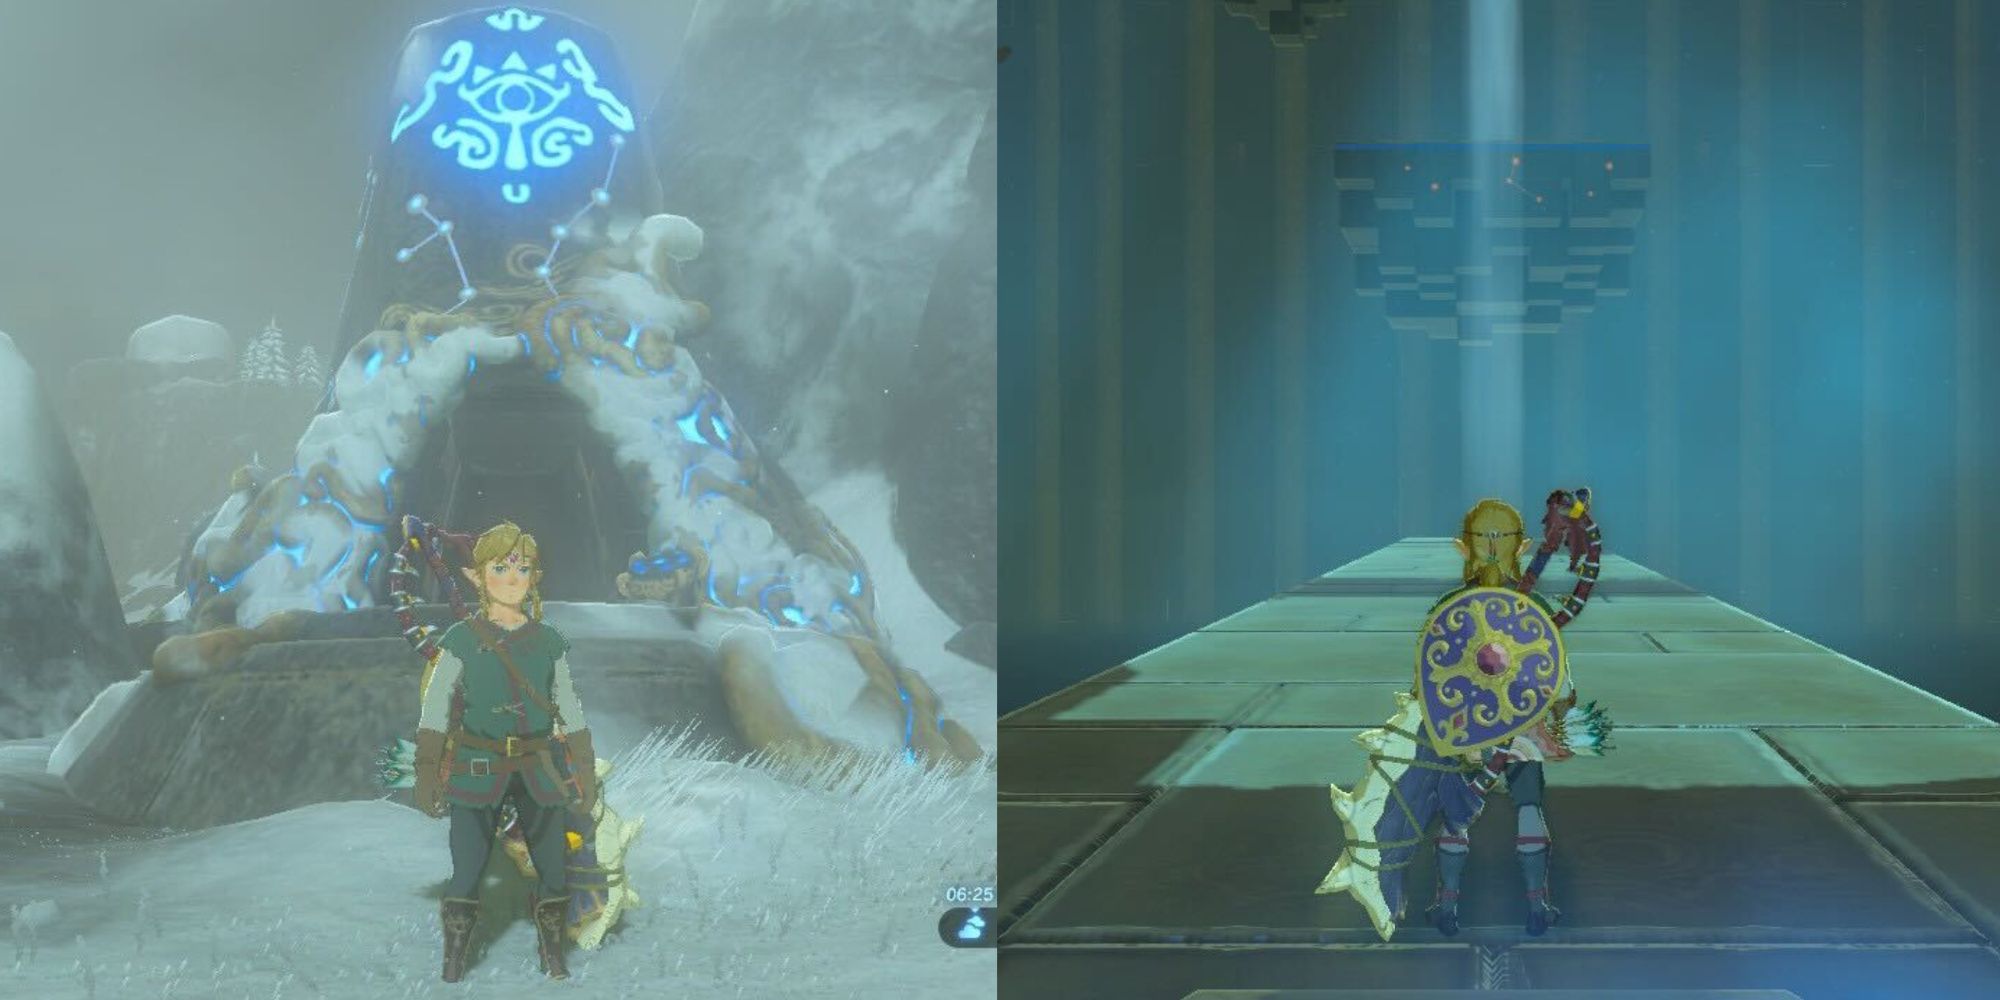 Breath of the Wild split screen of Link in front and inside Sha Warvo shrine.